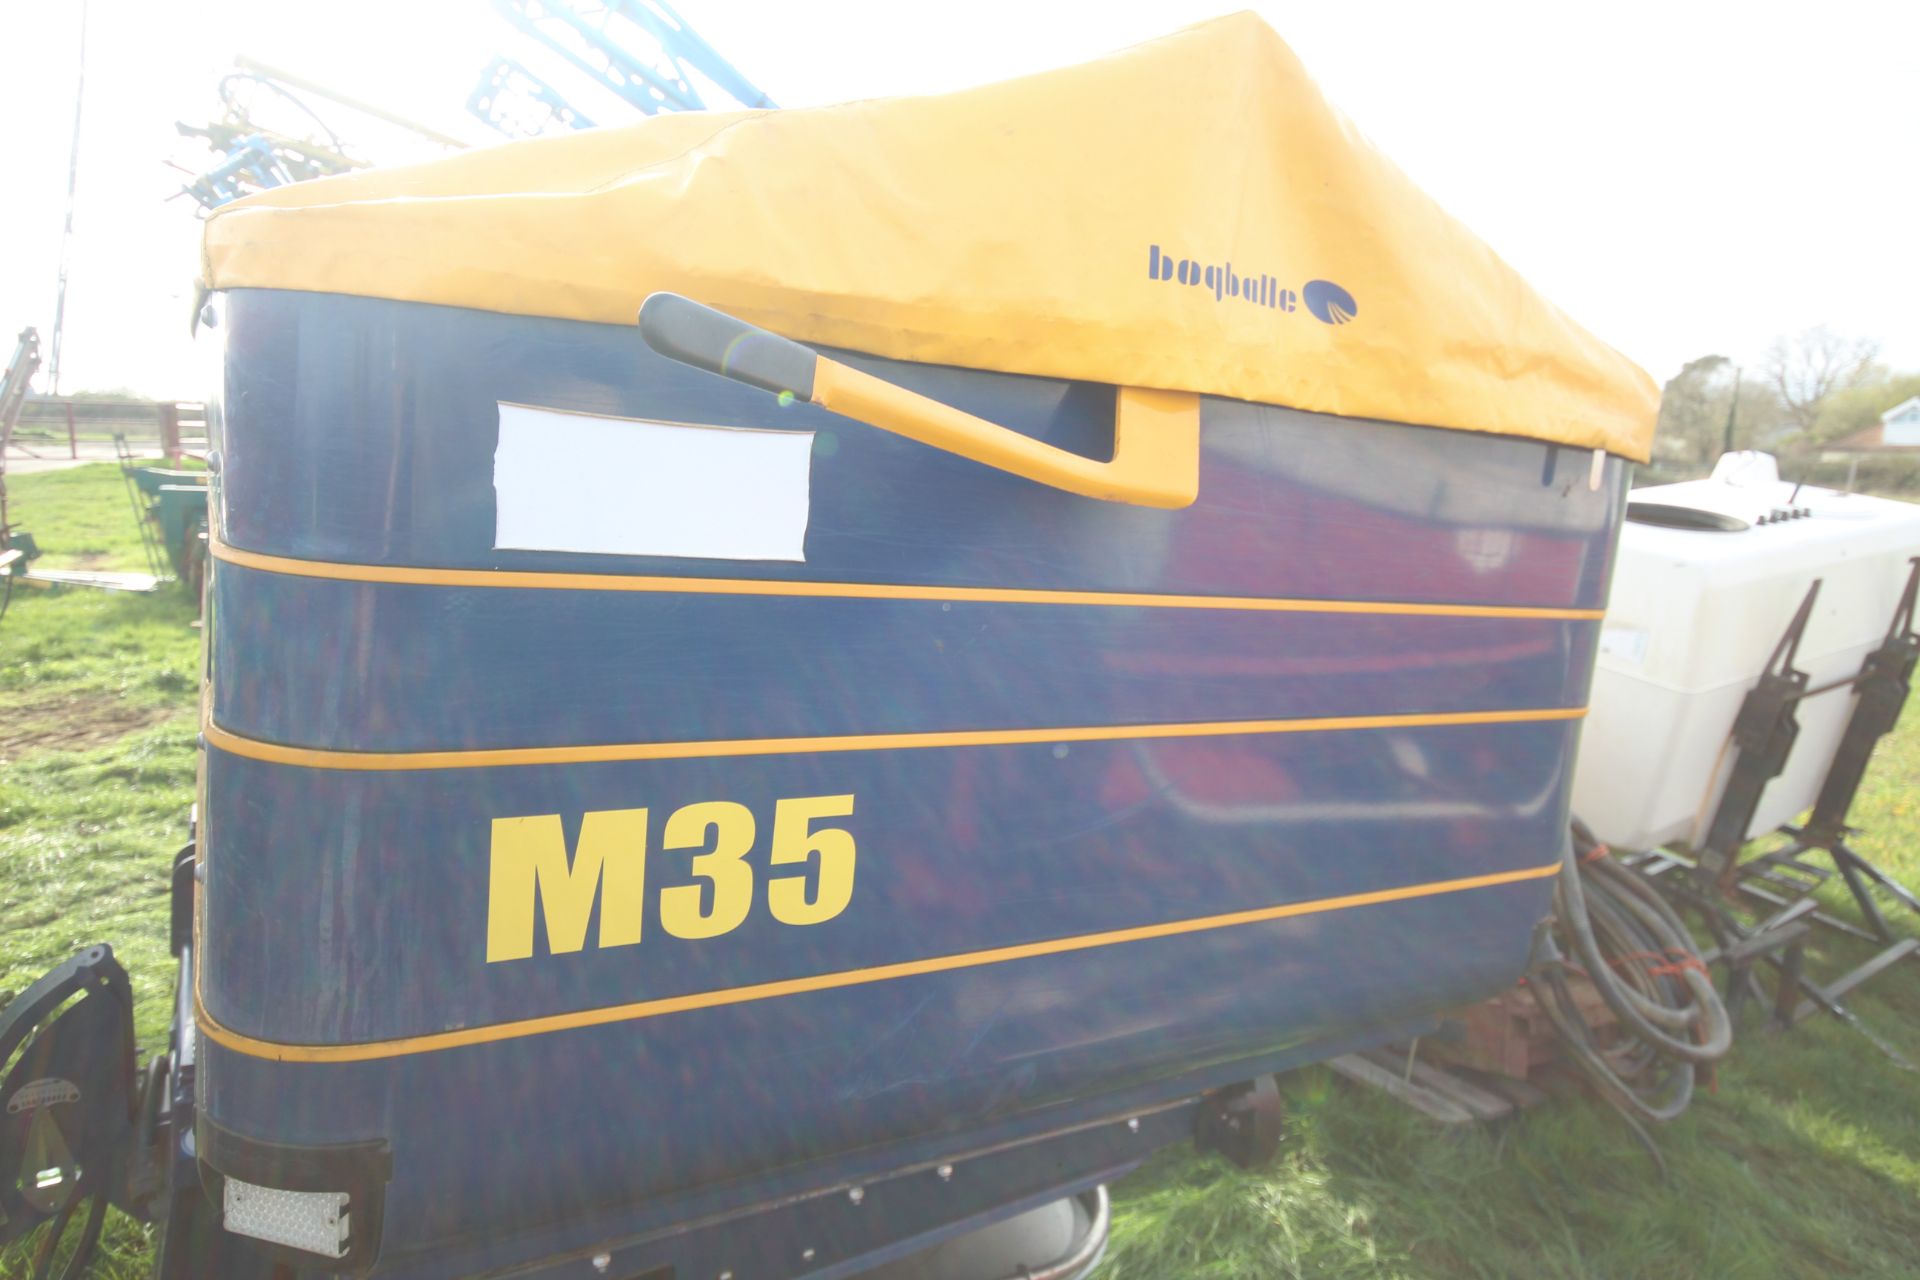 Bogballe M35W1 24m twin disc fertiliser spreader. 2019. Serial number 316. With weight cells and - Image 5 of 22